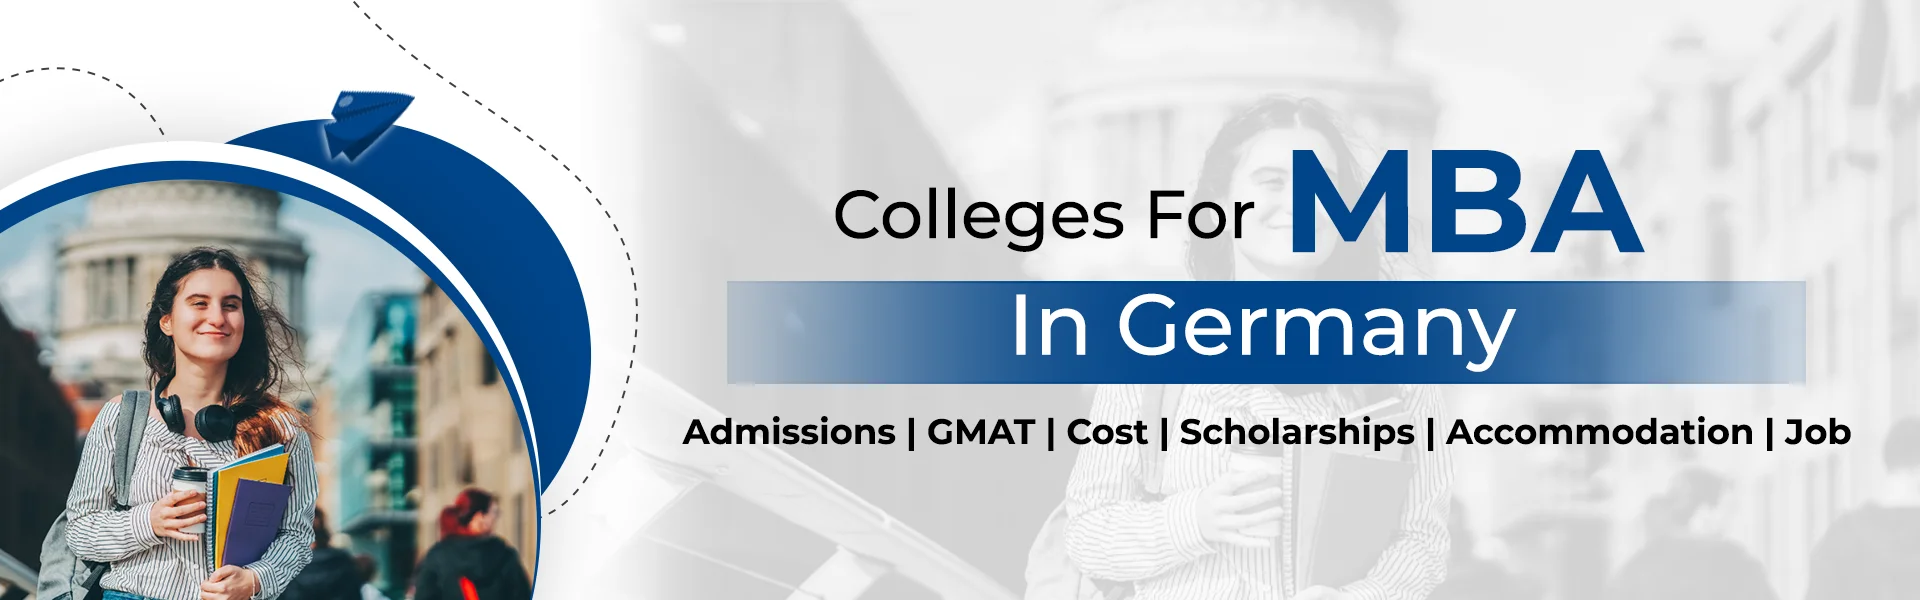 Colleges For MBA in Germany